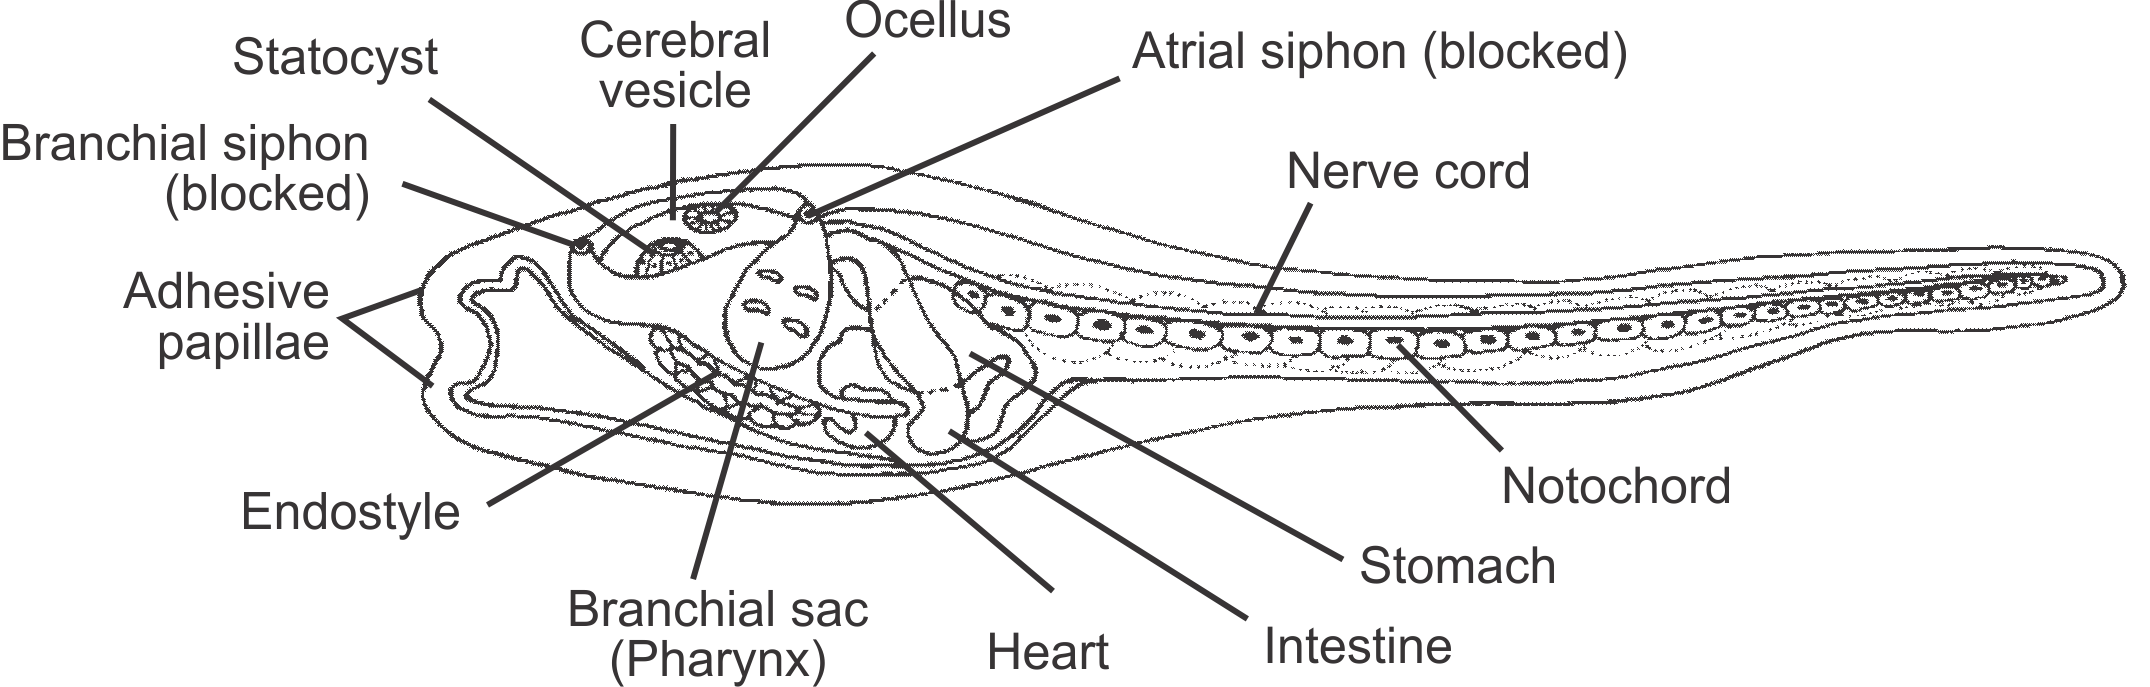 Image showing the internal anatomy of a tunicate larva.